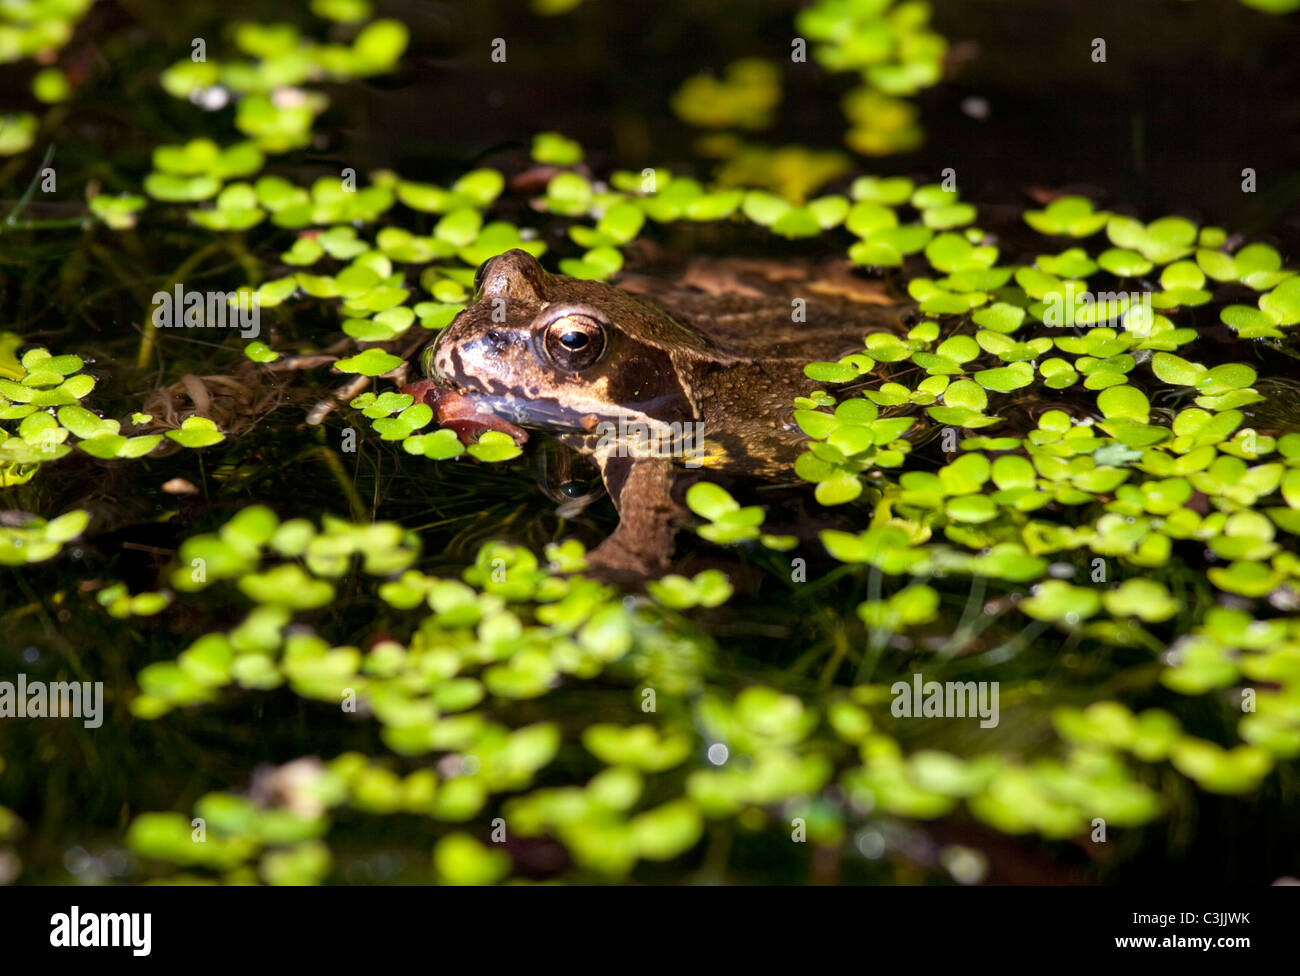 Frog camouflaged under pond weed in English garden pond Stock Photo